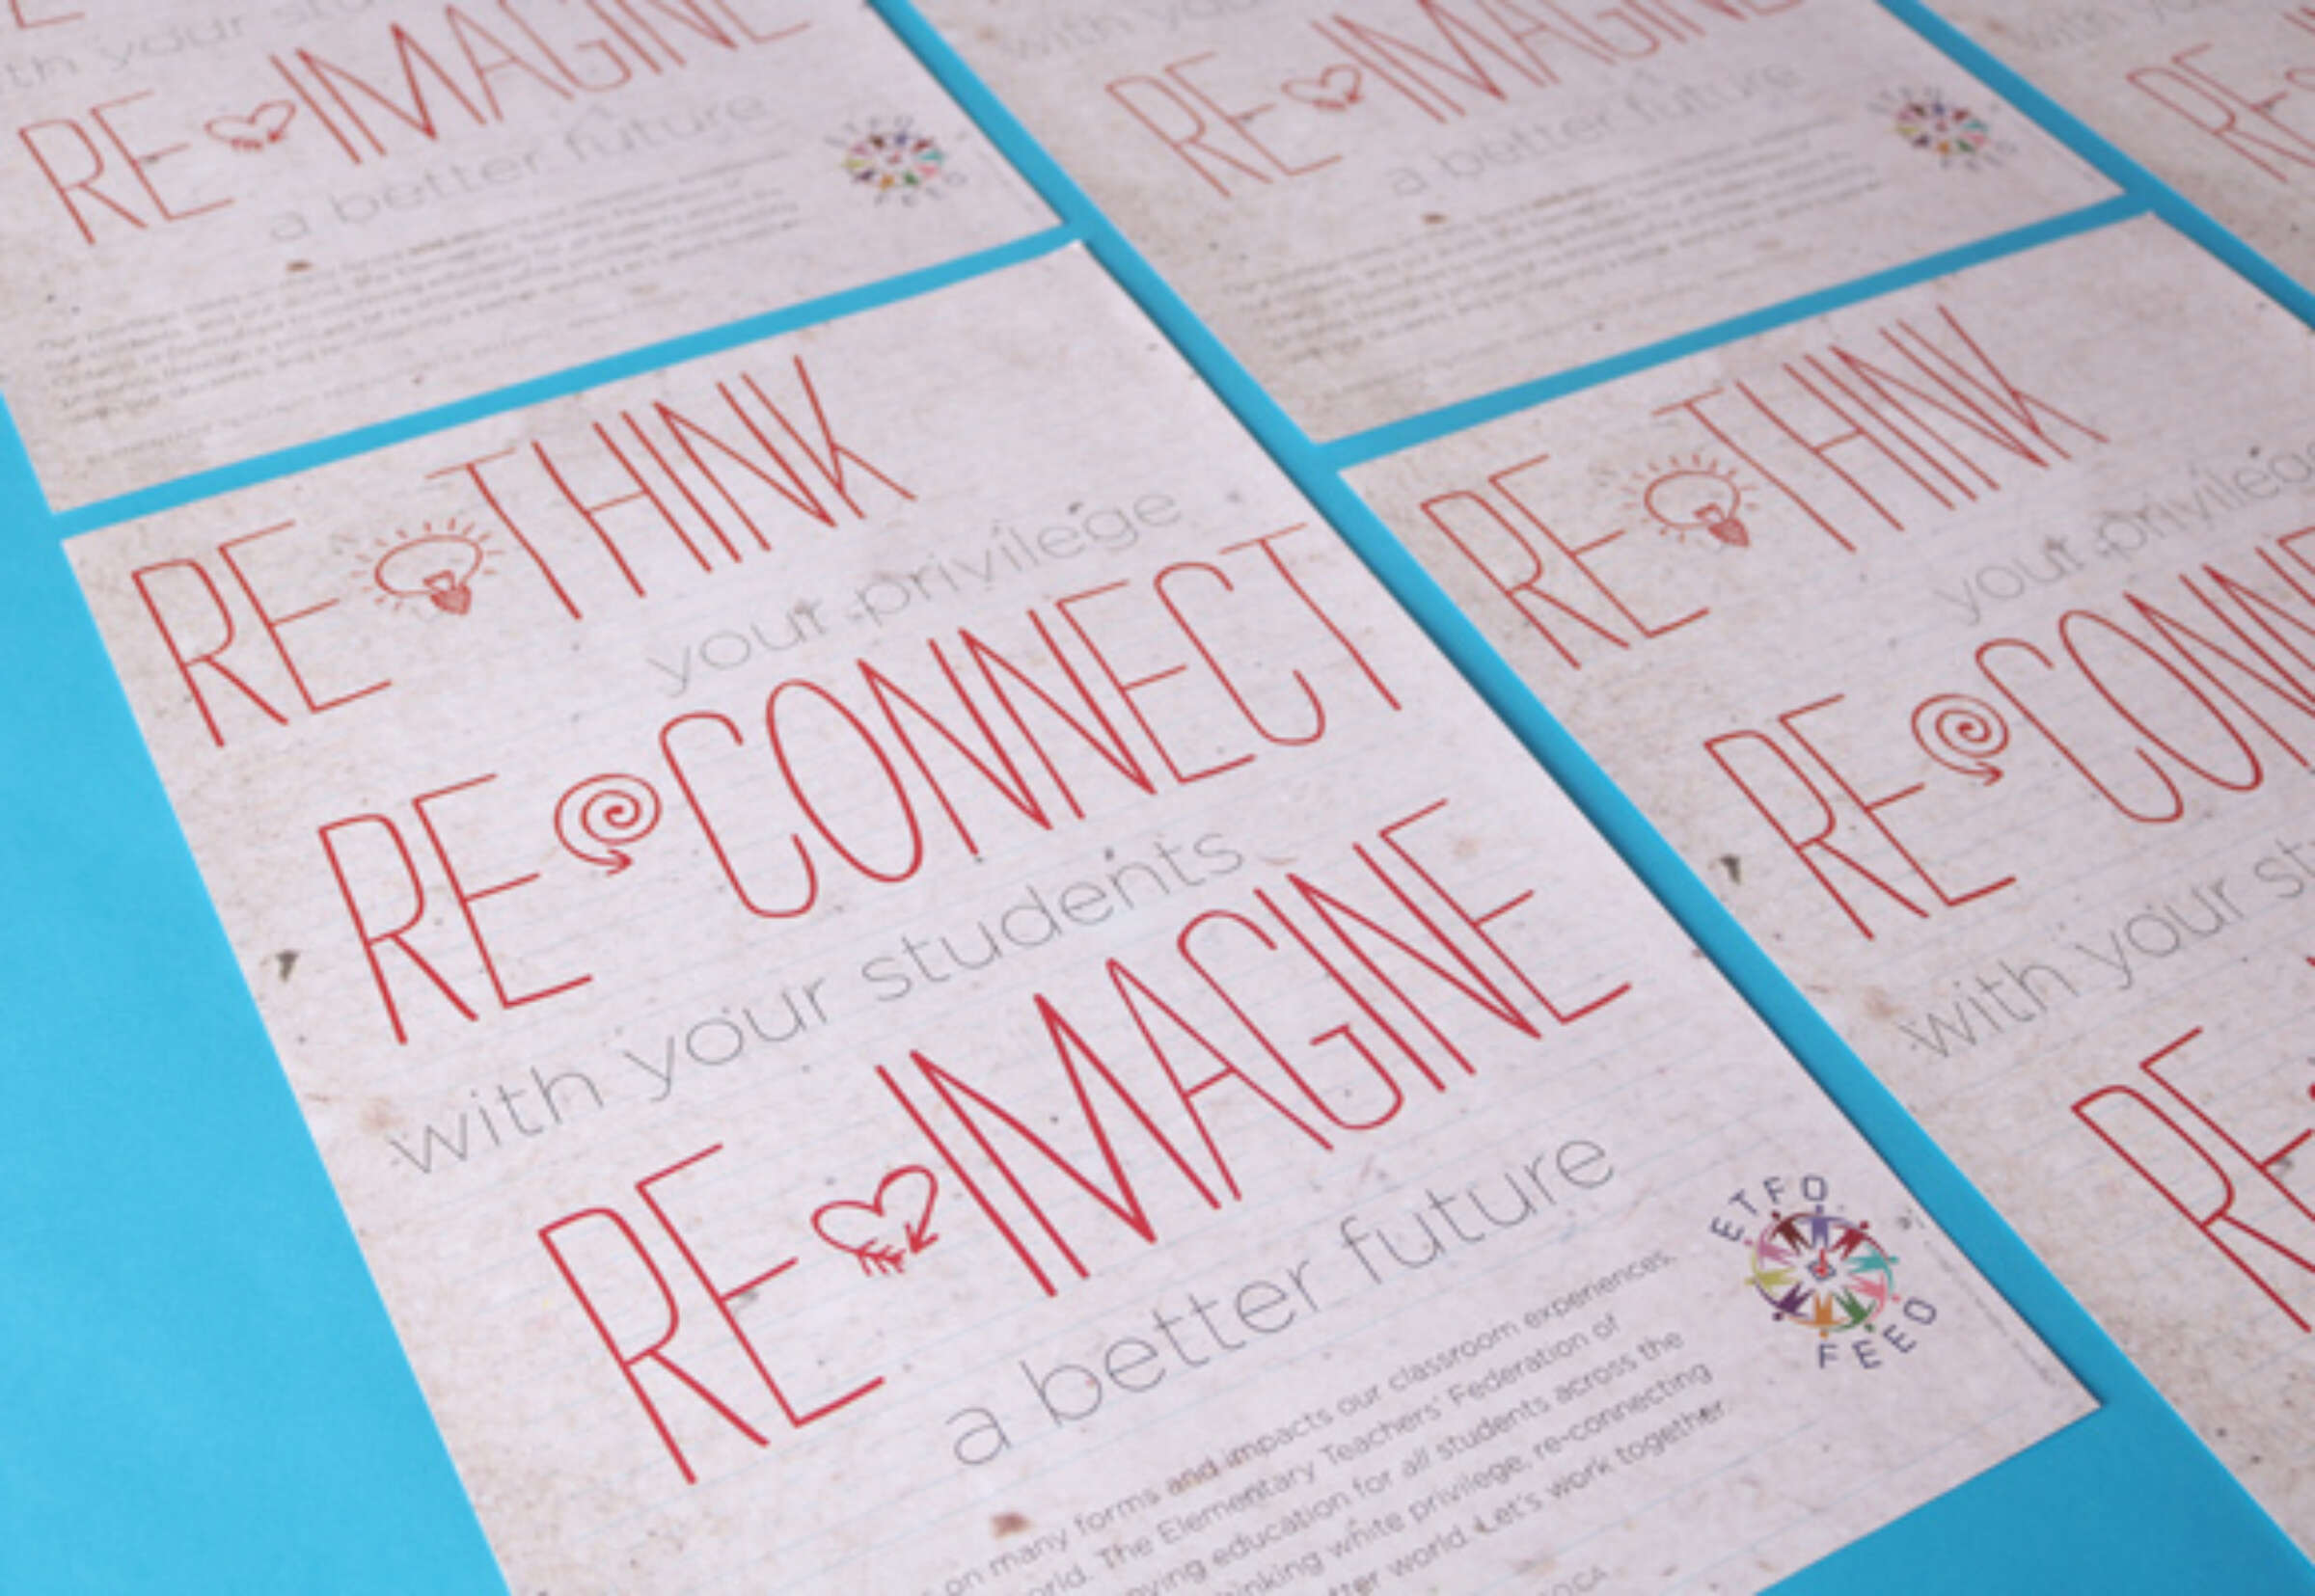 Flyers laying on a blue surface with the text "RE-IMAGINE a better future," "RE-THINK your privilege," "RE-CONNECT with your students," and "Rethink, Reconnect, Reimagine a better future" printed in red. EFO and FEB logos are present at the bottom.